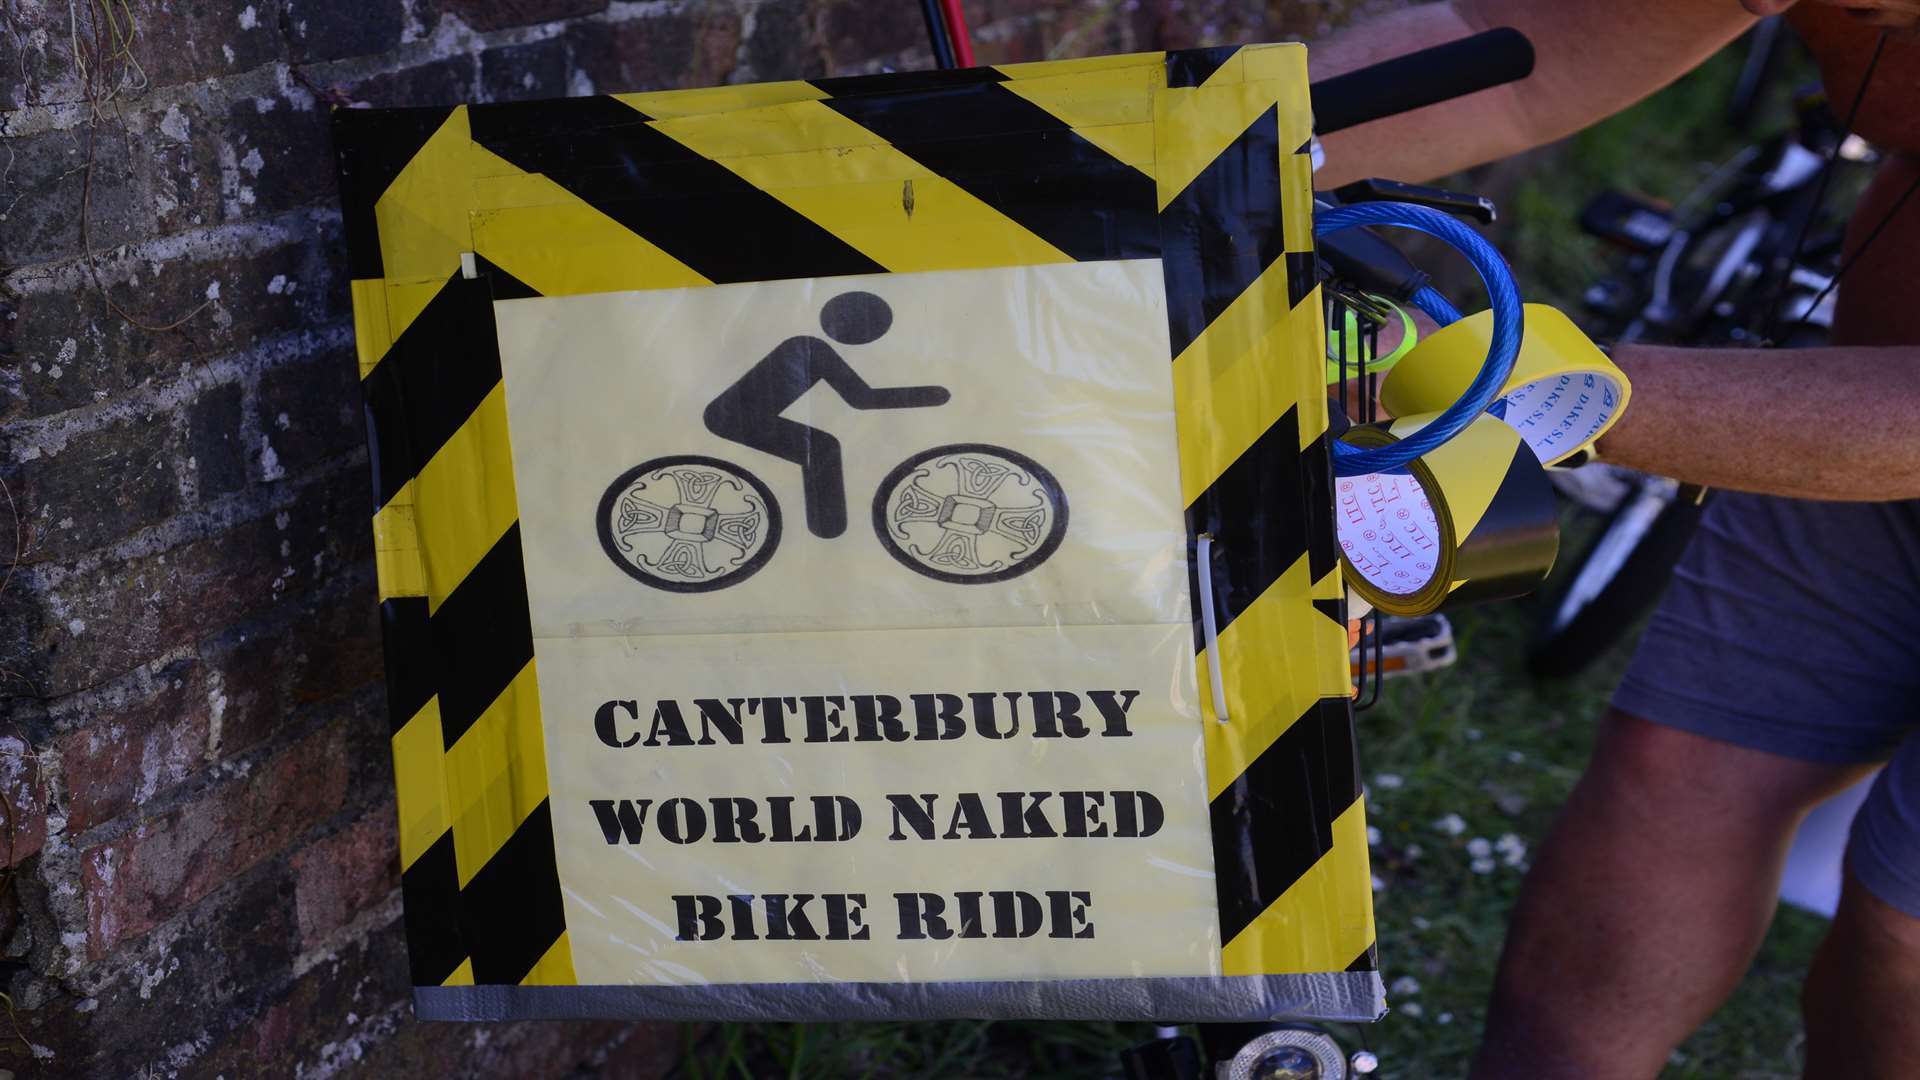 The event grabbed the attention of Canterbury residents today